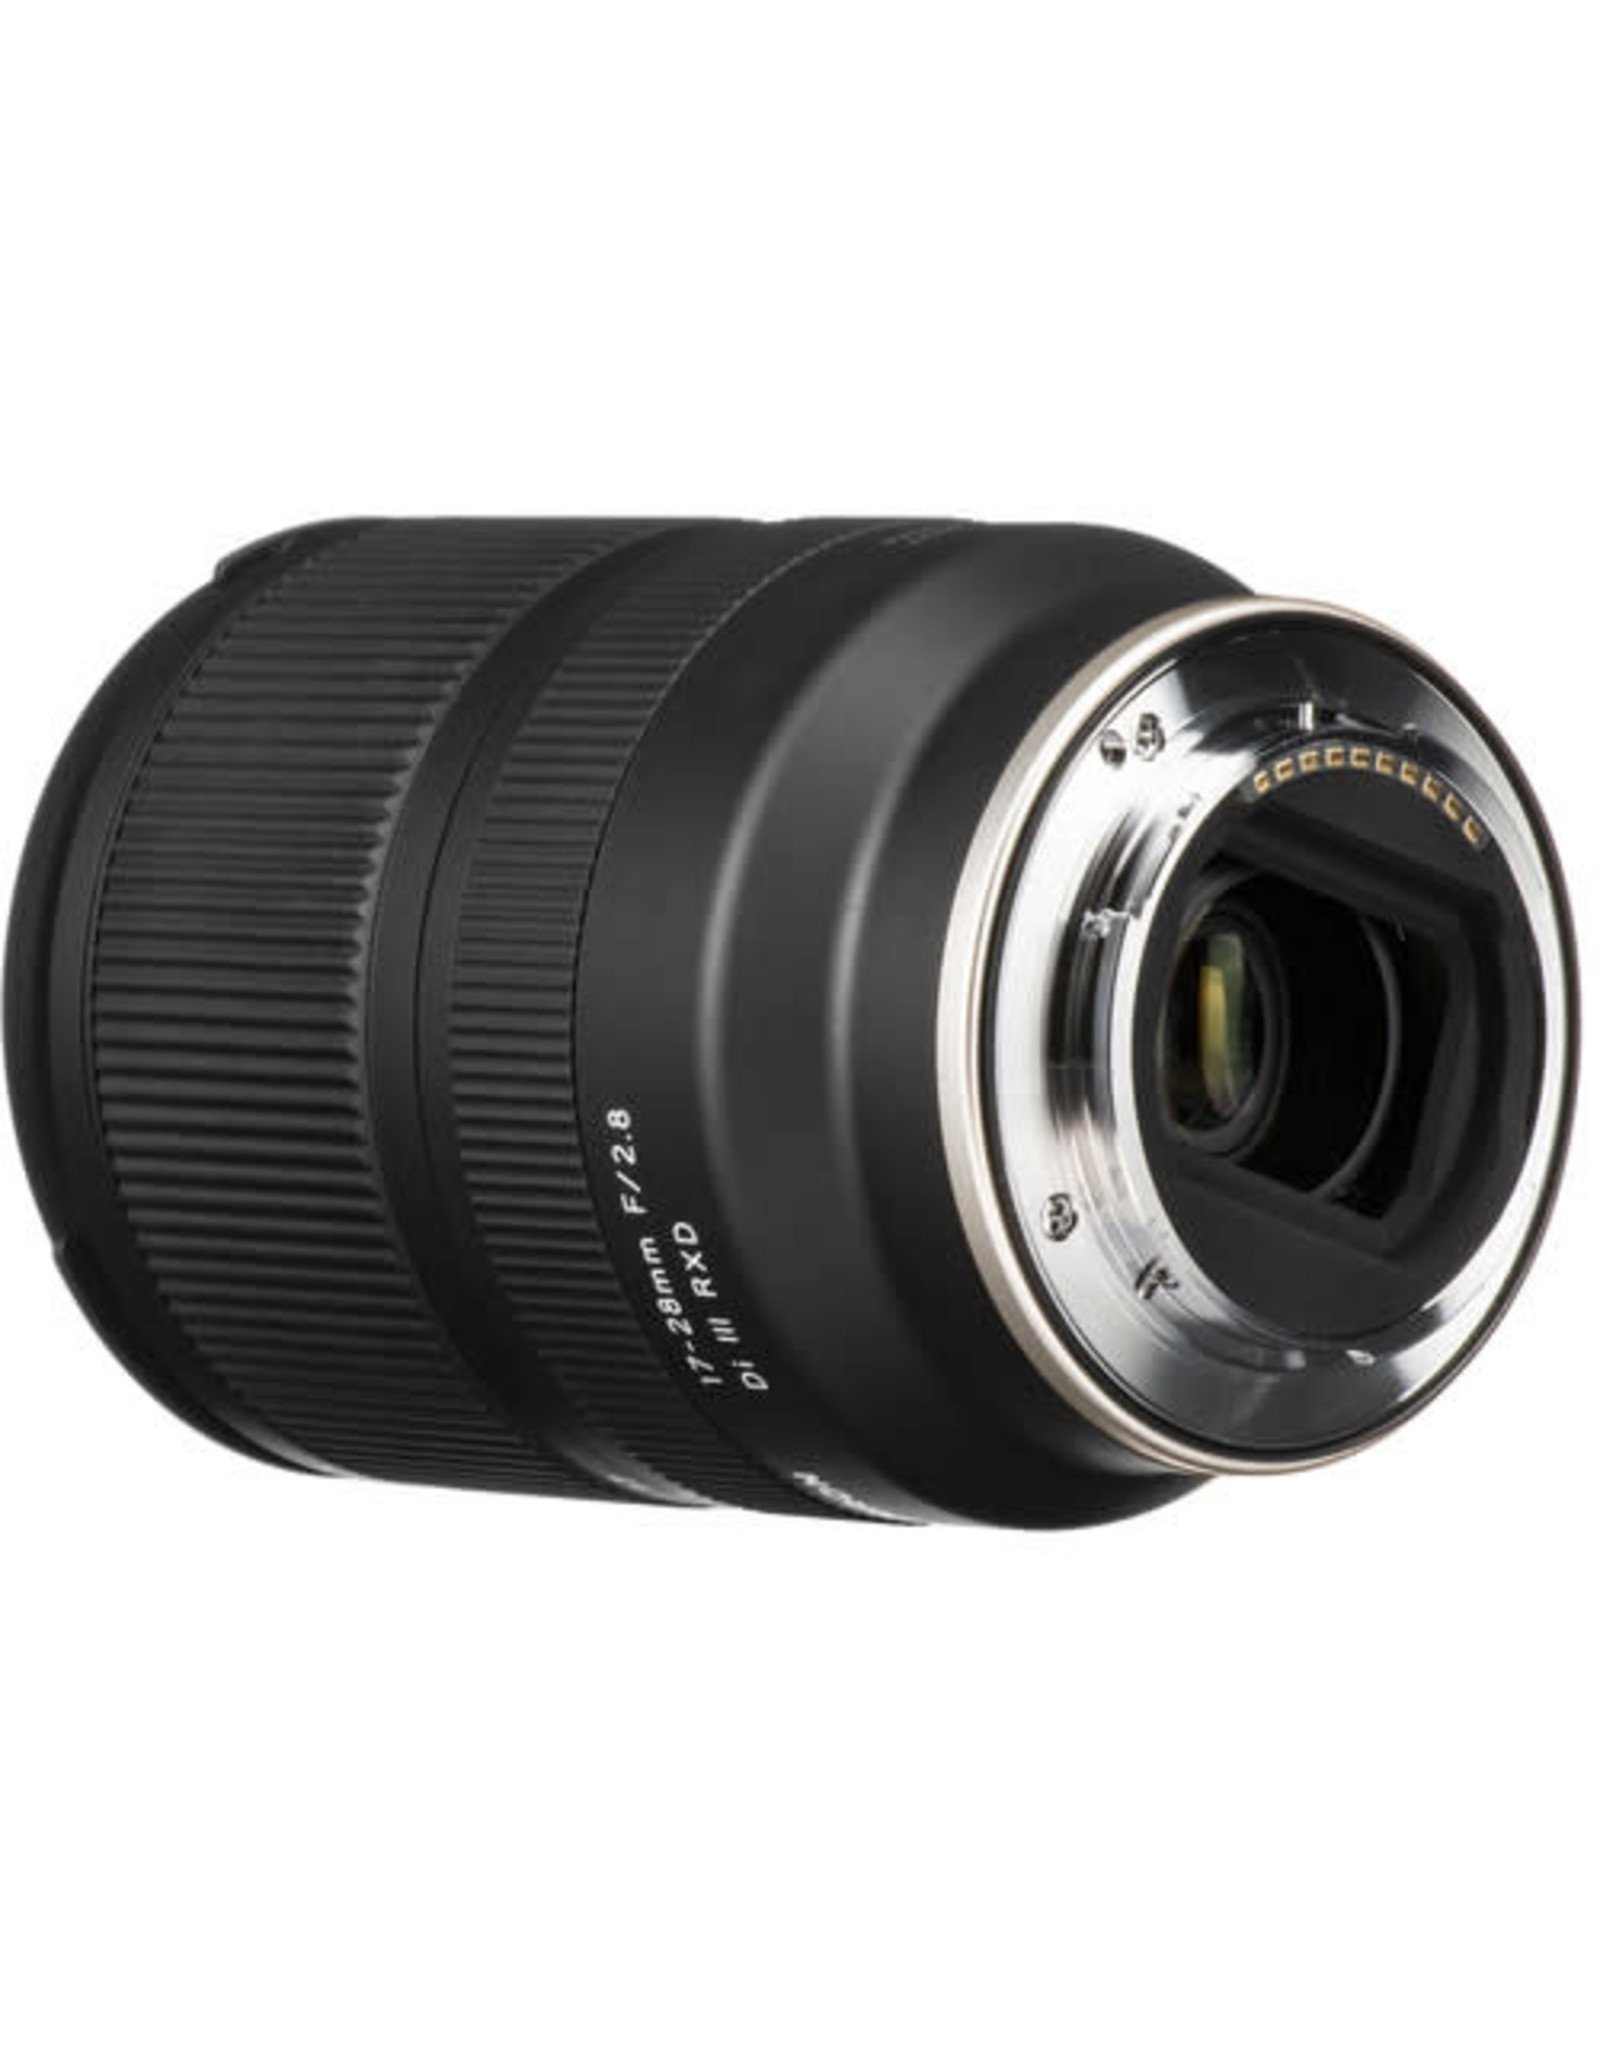 Tamron 17-28mm f/2.8 Di III RXD Lens for Sony E - Camera Concepts